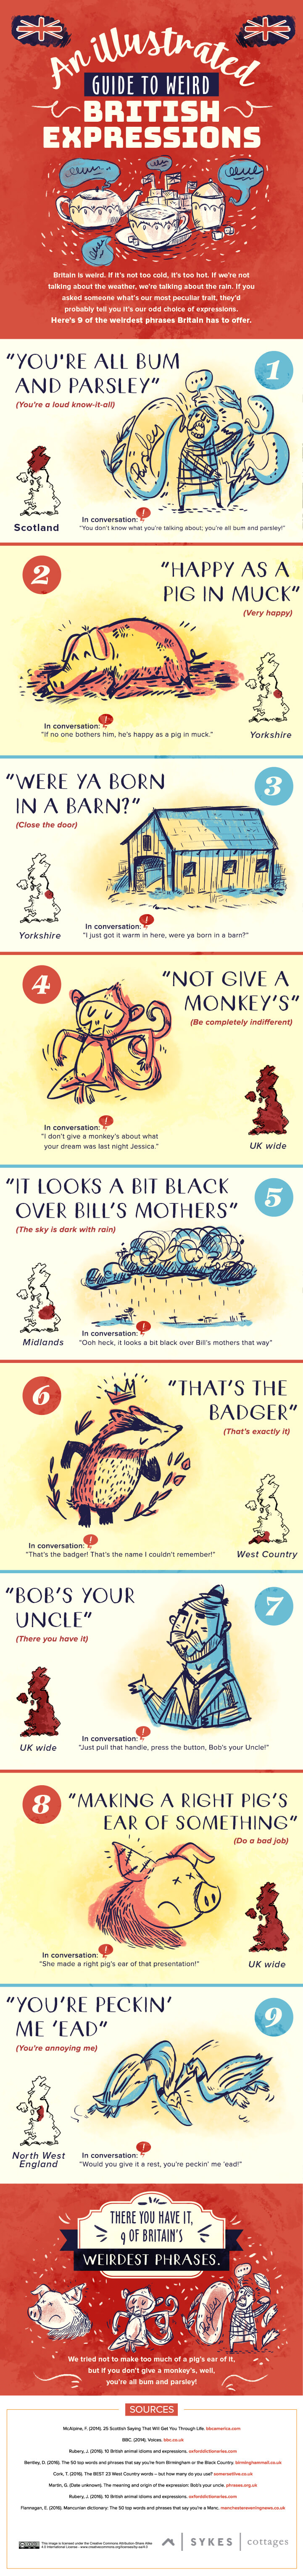 Illustrated Guide To Weird British Expression